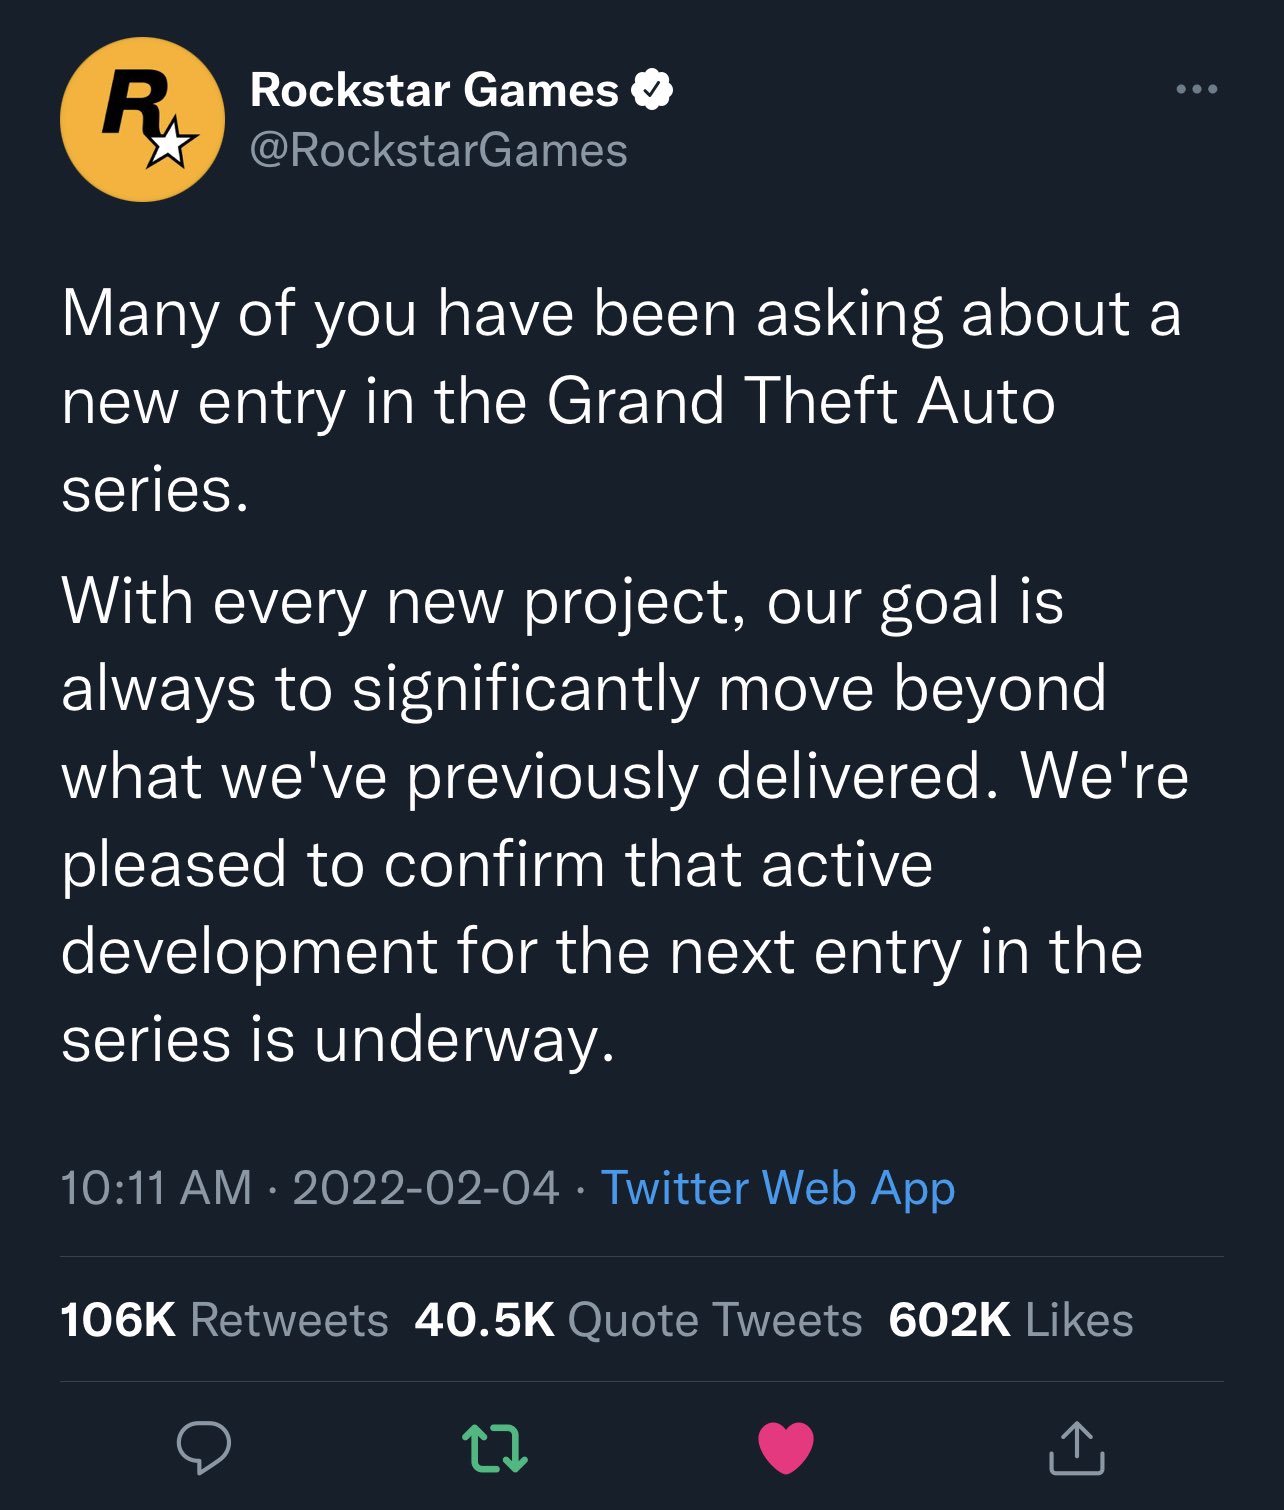 Rockstar's statement is now the most liked tweet in gaming